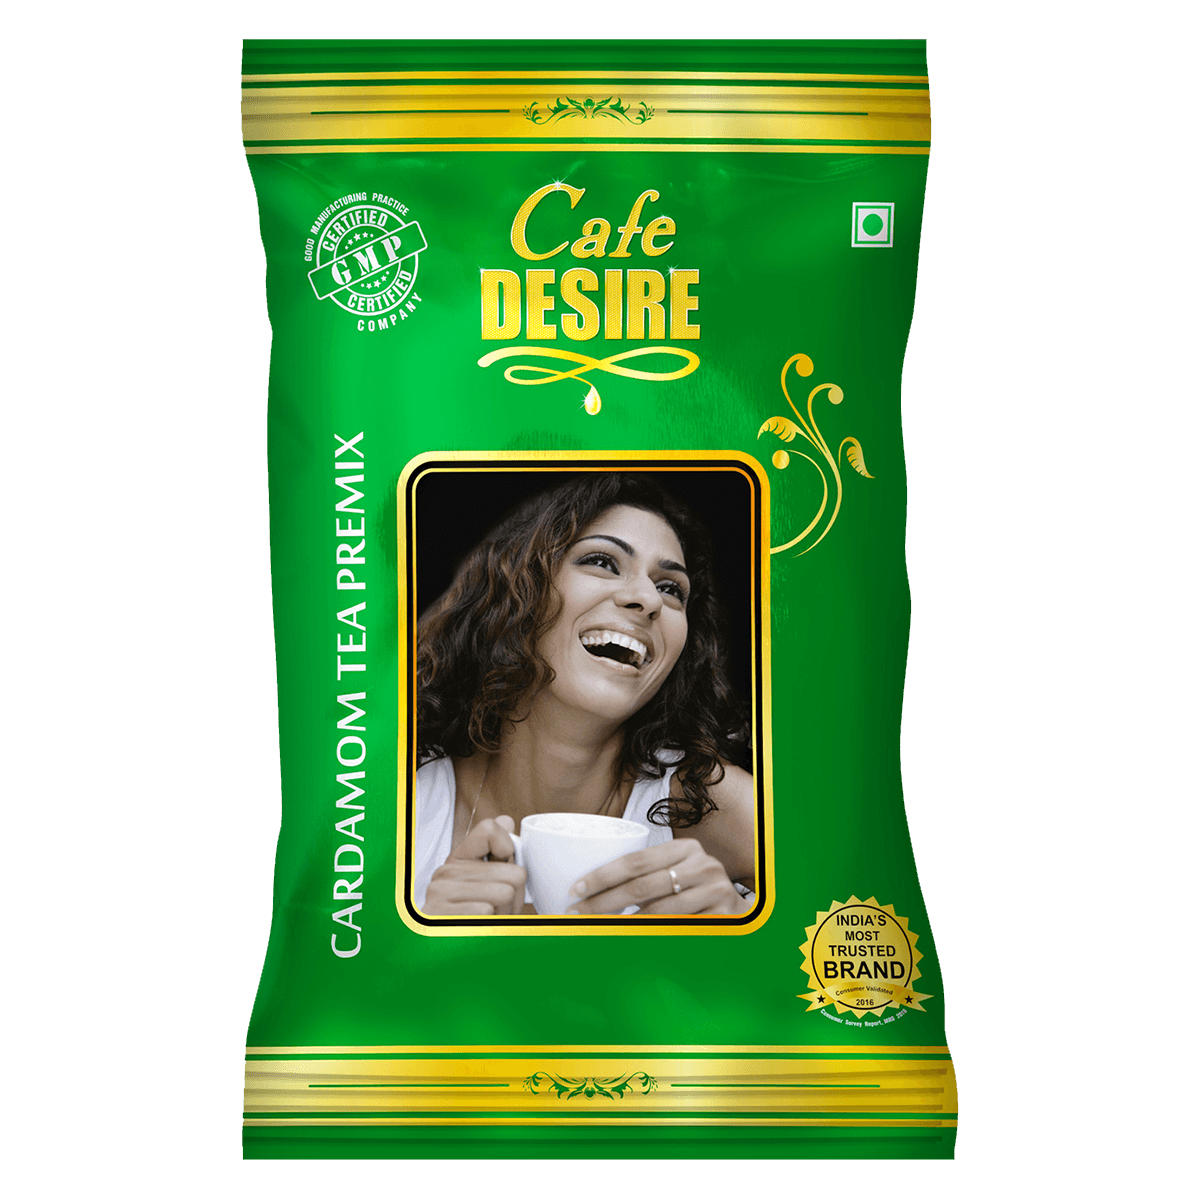 Instant Cardamom Tea Premix (1 kg) | 3 in 1 Tea | Milk not required | Rich taste as Home-made | Cardamom Flavour Imported from Geneva | Manual use - Just add Hot Water | Suitable for all Vending Machines | Makes 90 cups per KG - Cafe Desire Cafe Desire My Cafe Desire Instant Cardamom Tea Premix (1 kg) | 3 in 1 Tea | Milk not required | Rich taste as Home-made | Cardamom Flavour Imported from Geneva | Manual use - Just add Hot Water | Suitable for all Vending Machines | Makes 90 cups per KG